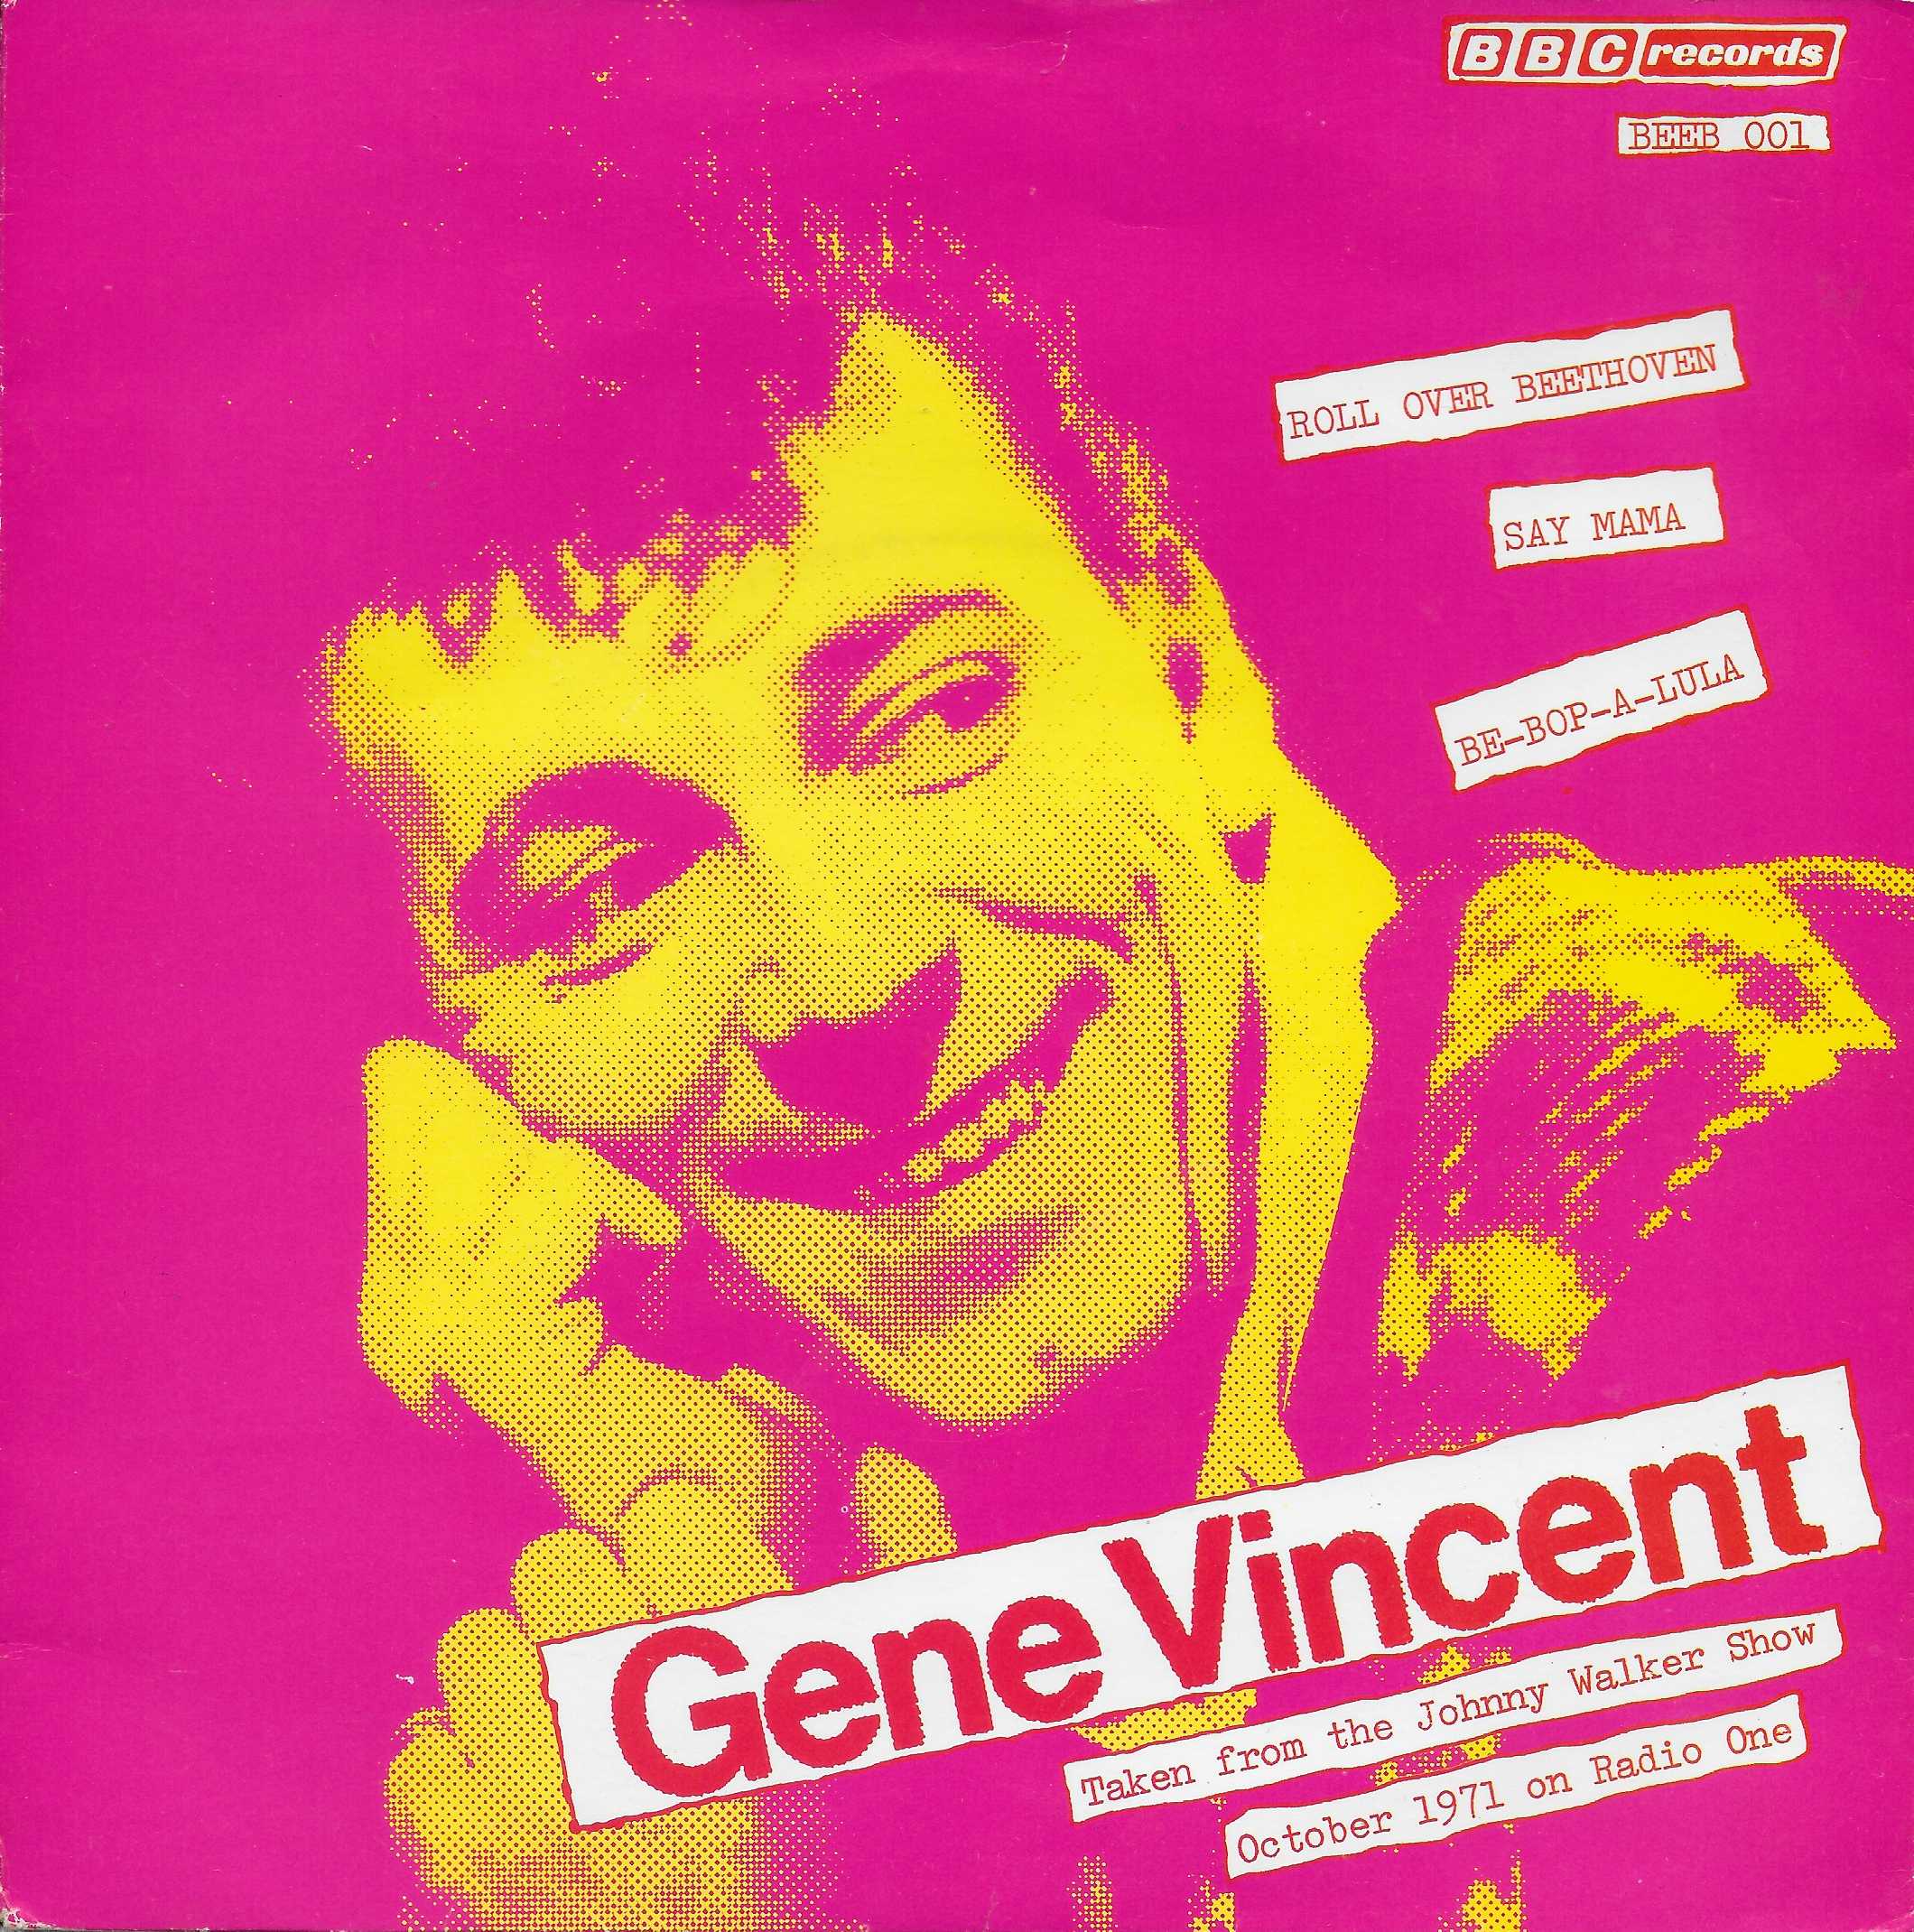 Picture of BEEB 001 Roll over Beethoven by artist Berry / Gene Vincent from the BBC singles - Records and Tapes library